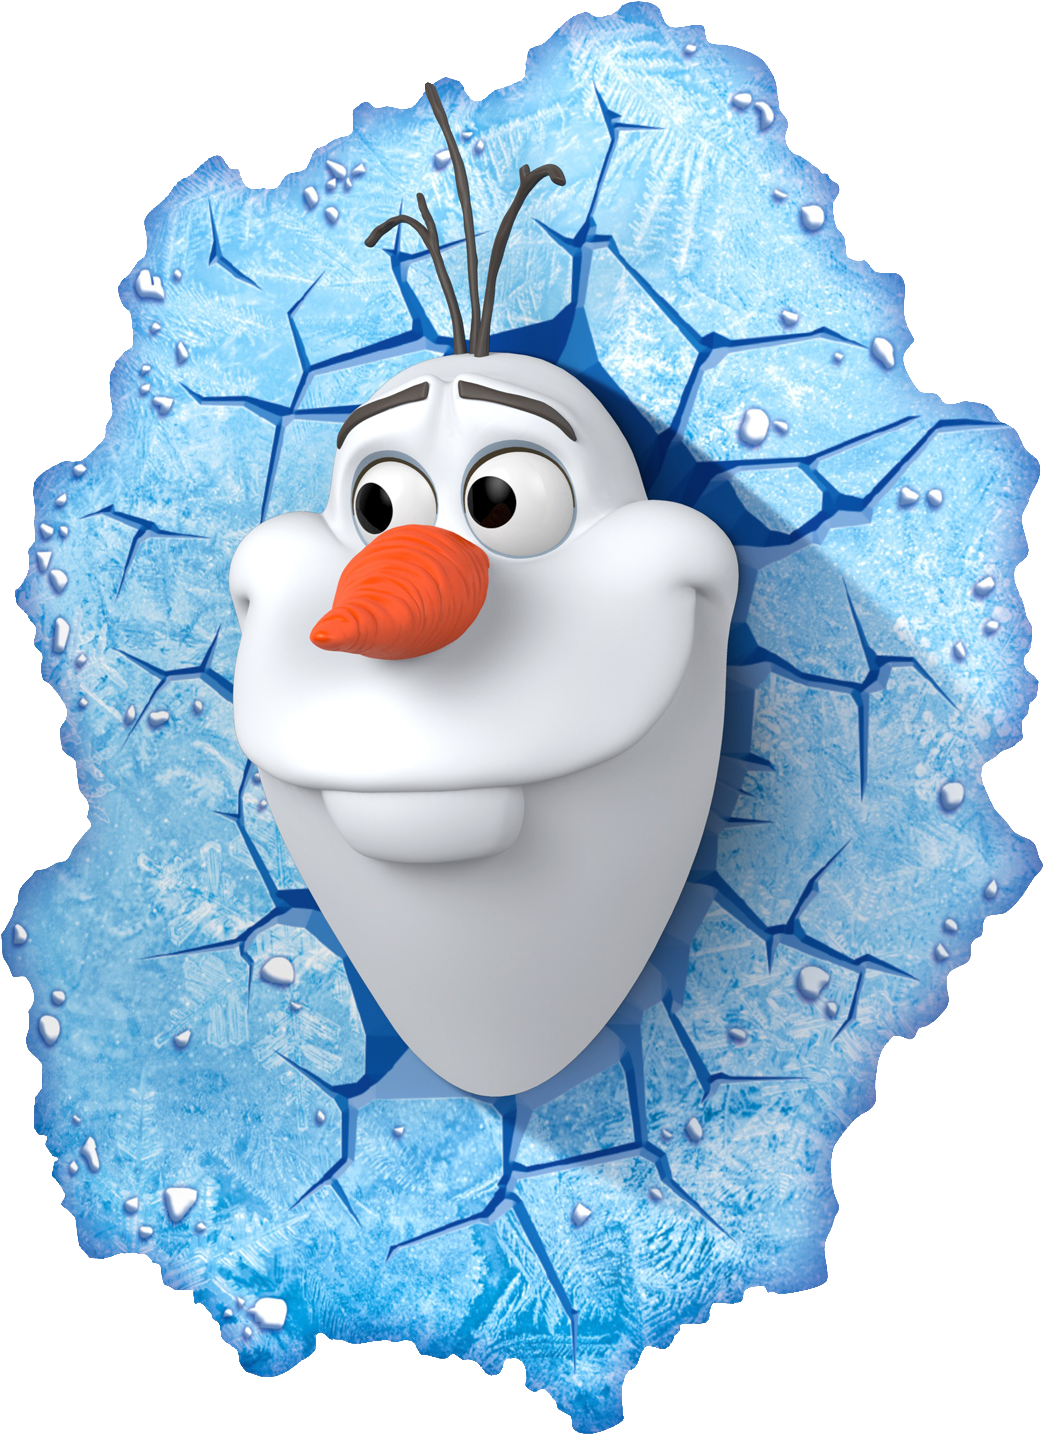 Download Frozen Olaf Png Picture For Designing Projects ...